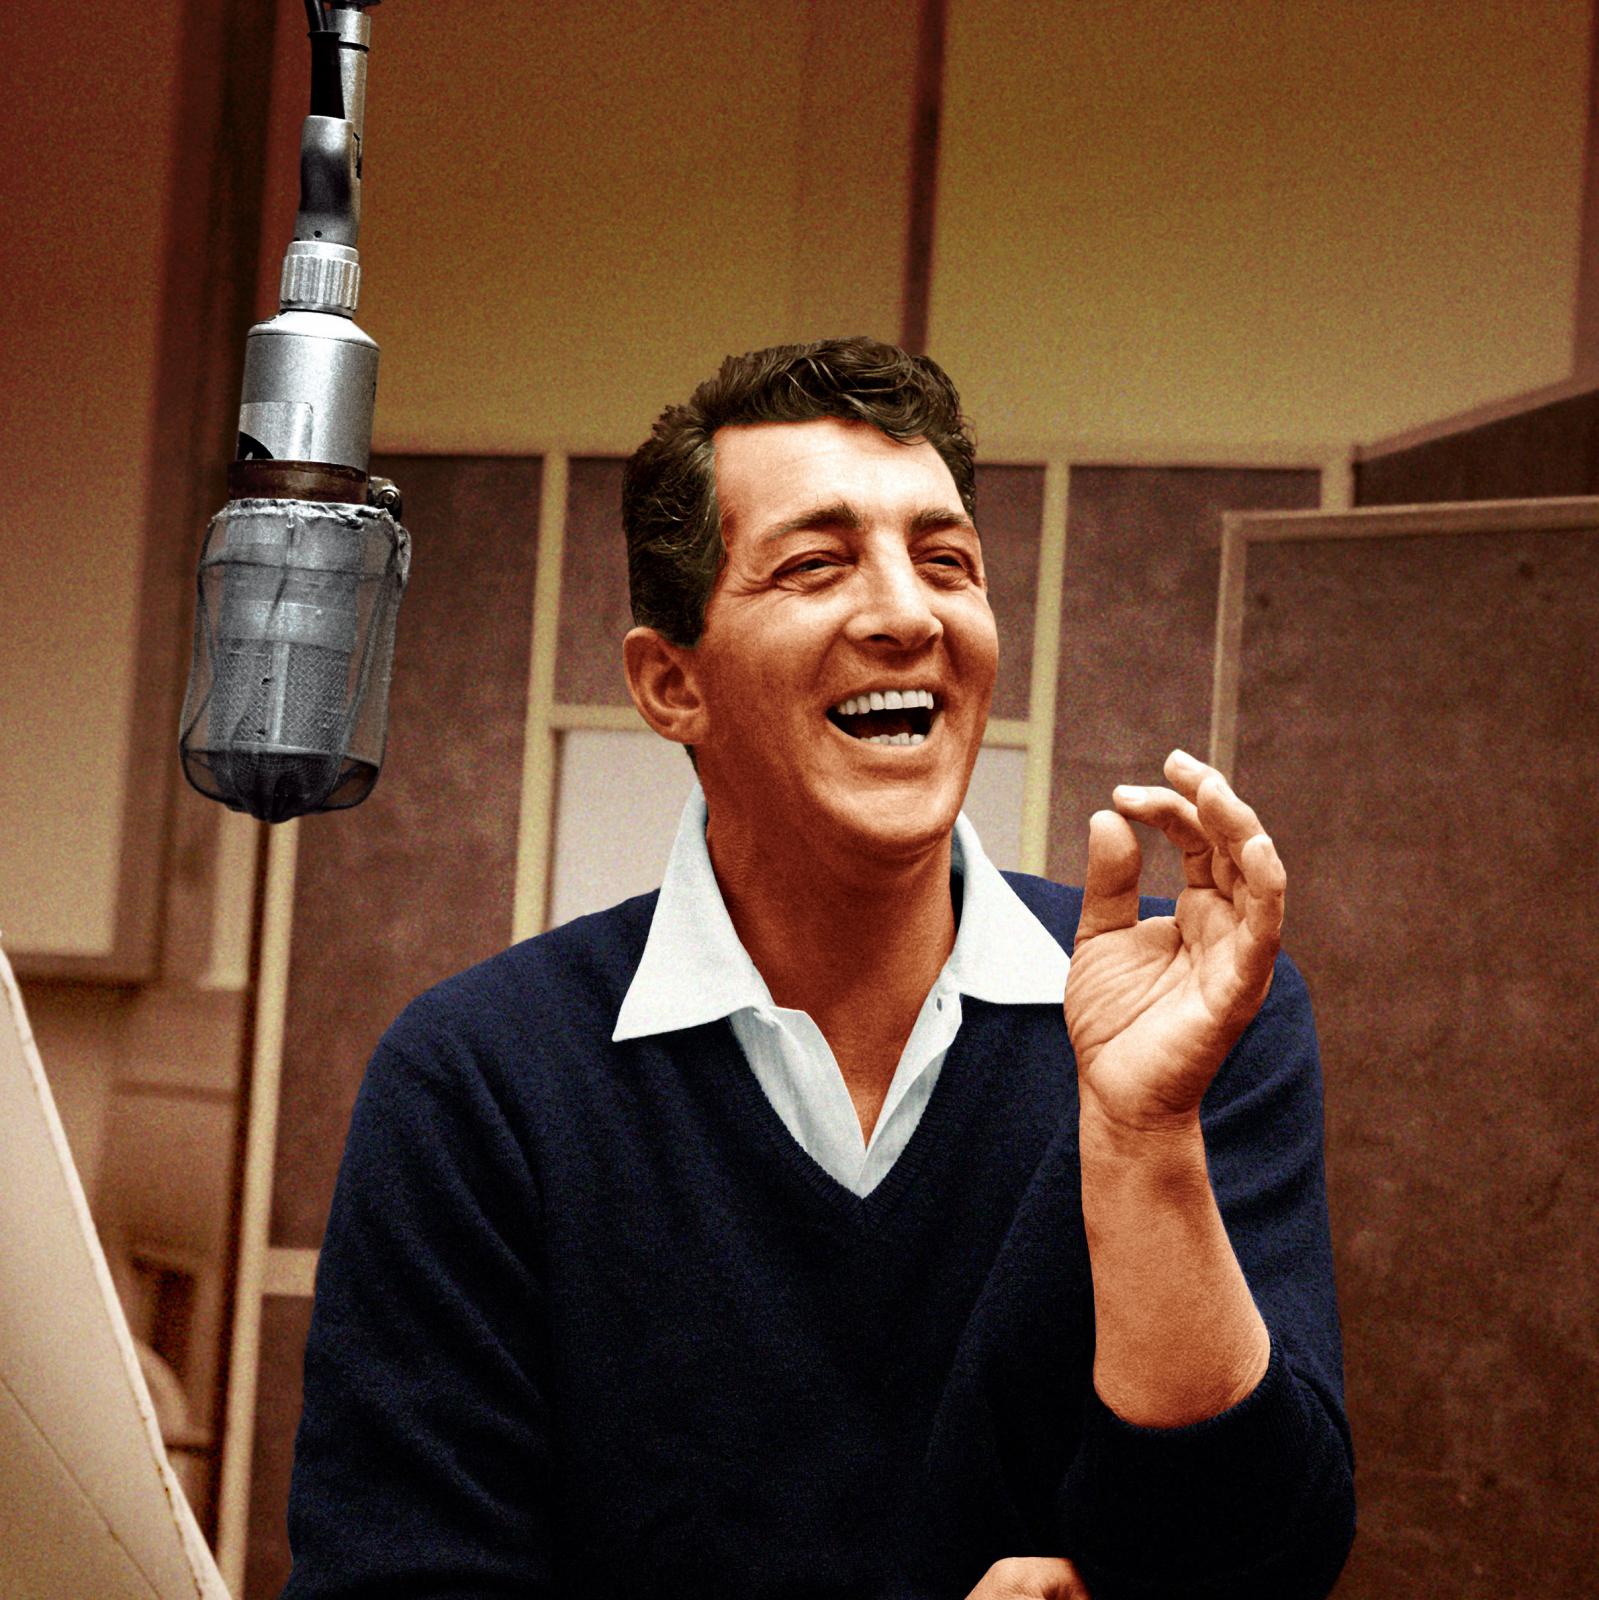 Dean Martin - $30 Million Net Worth, The King Of Cool